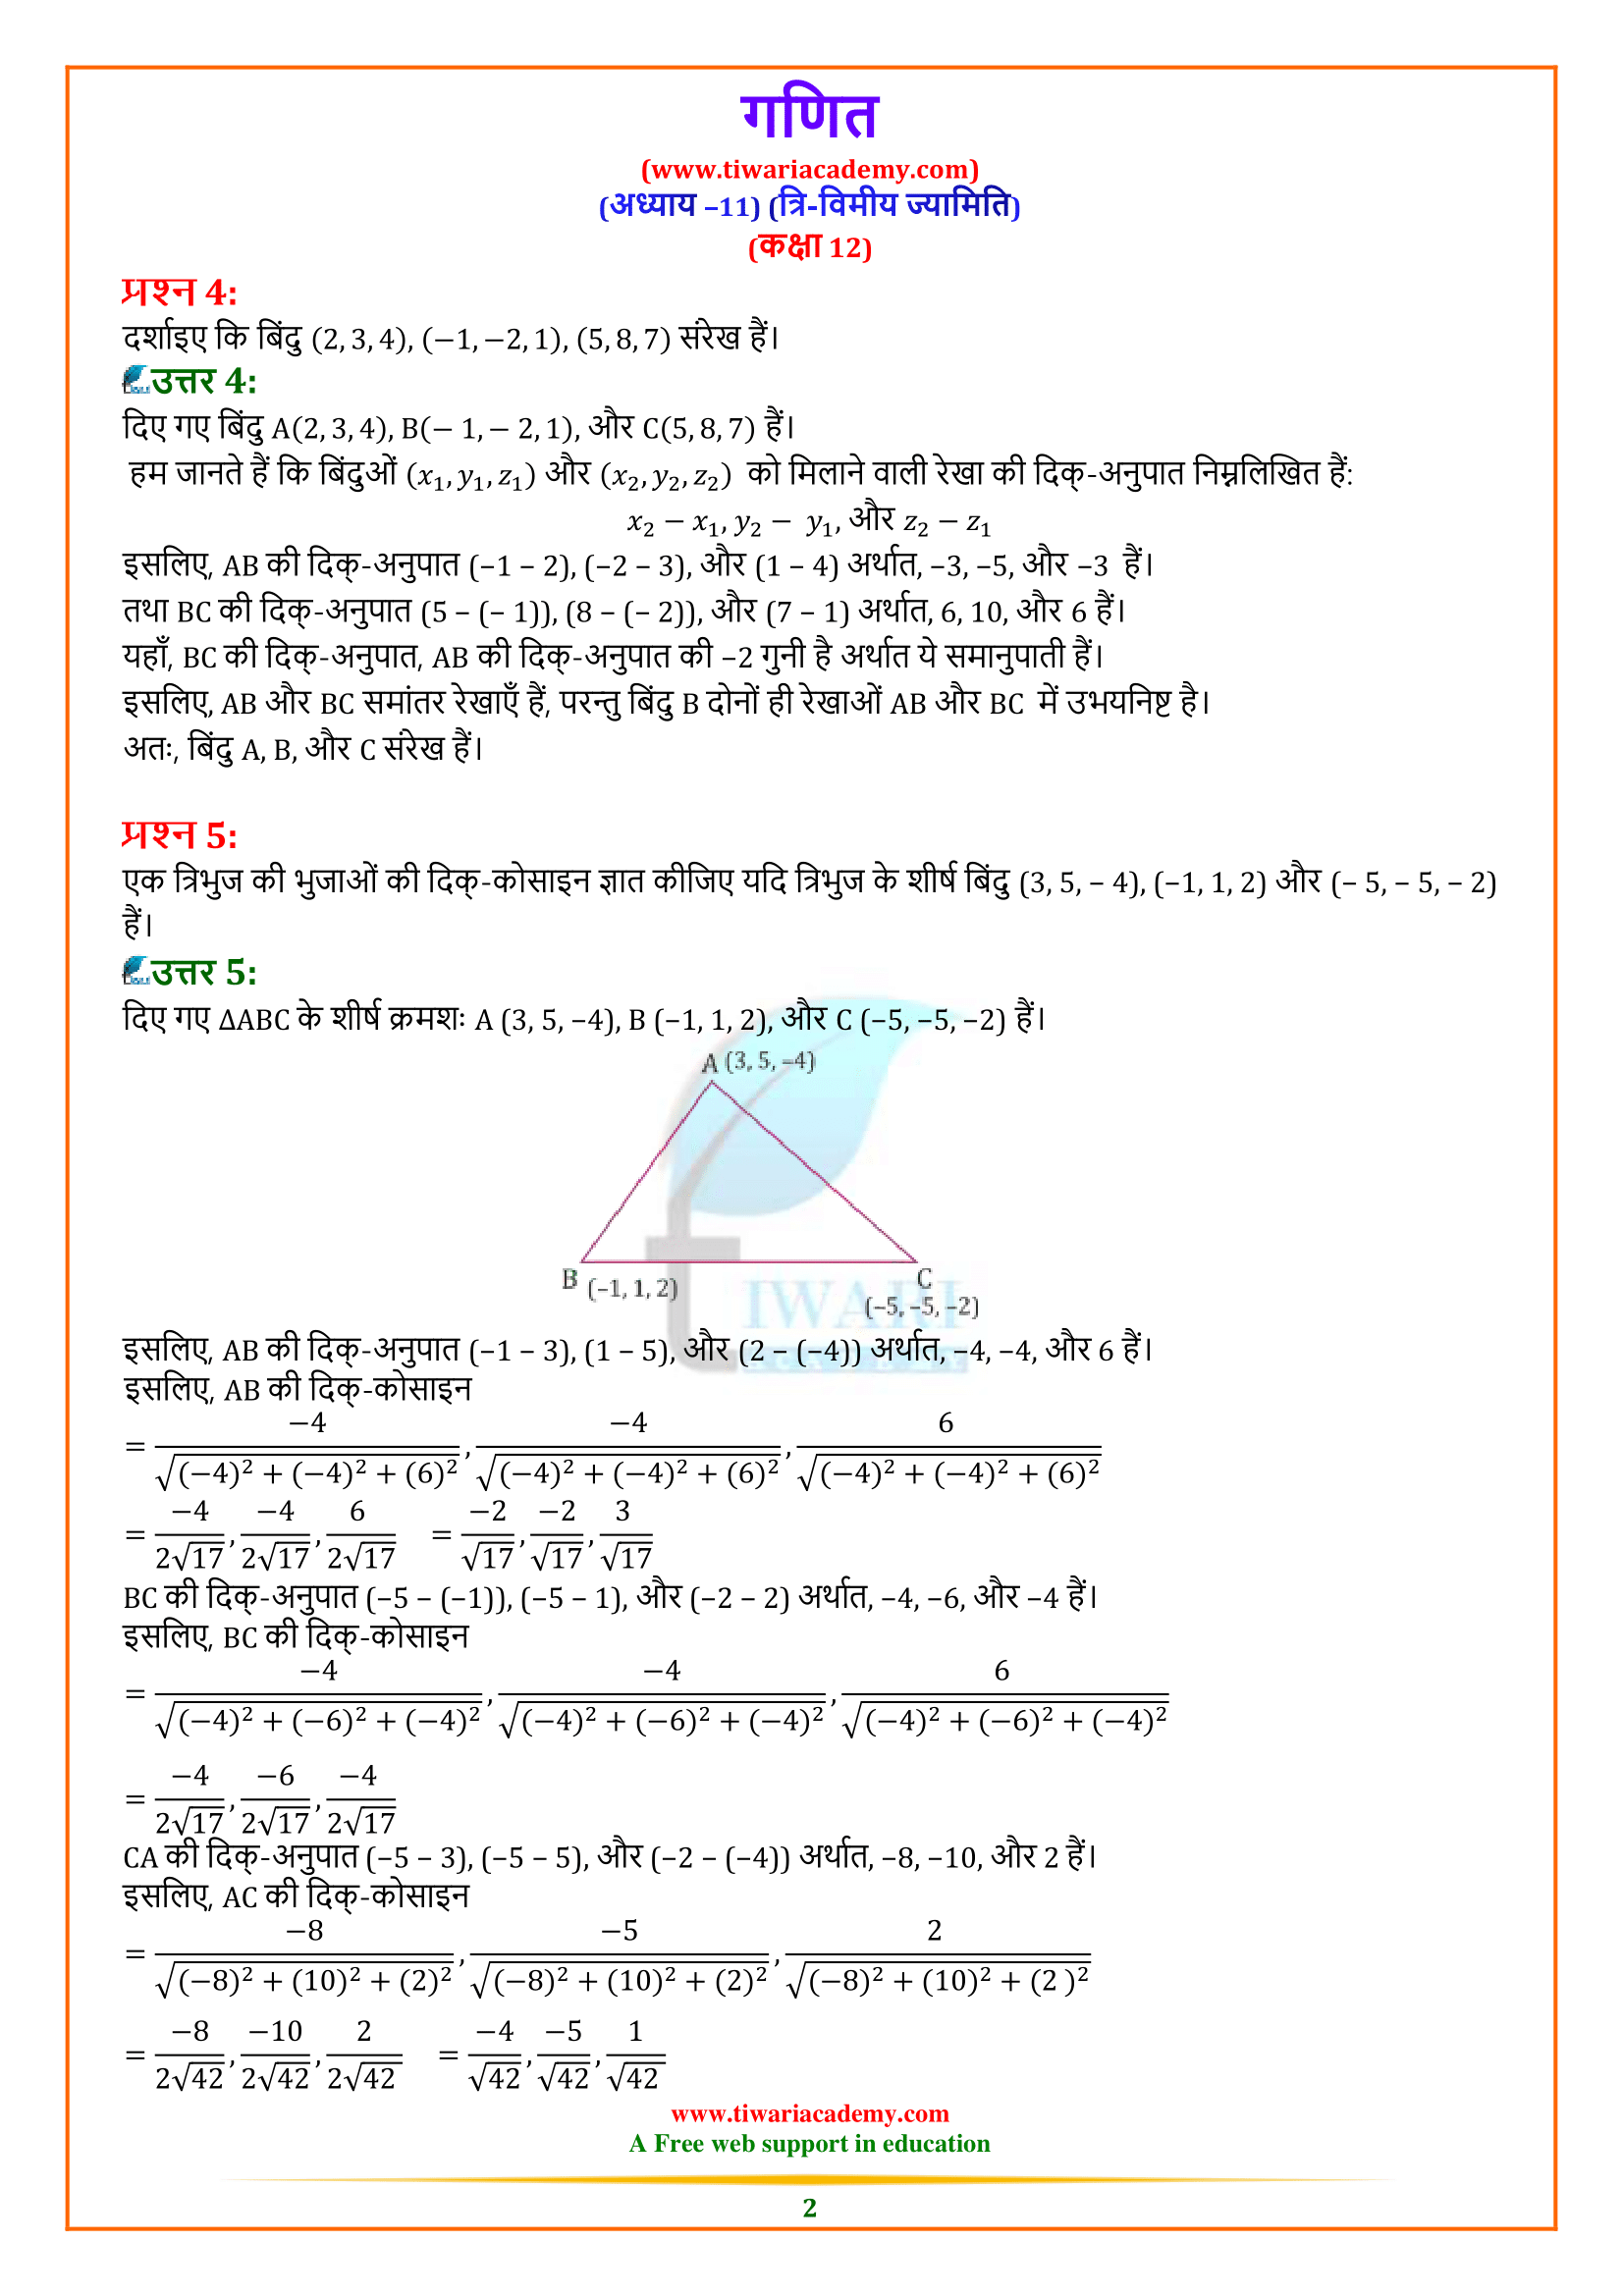 Class 12 Maths Exercise 11.1 Solutions in Hindi Medium for intermediate up board